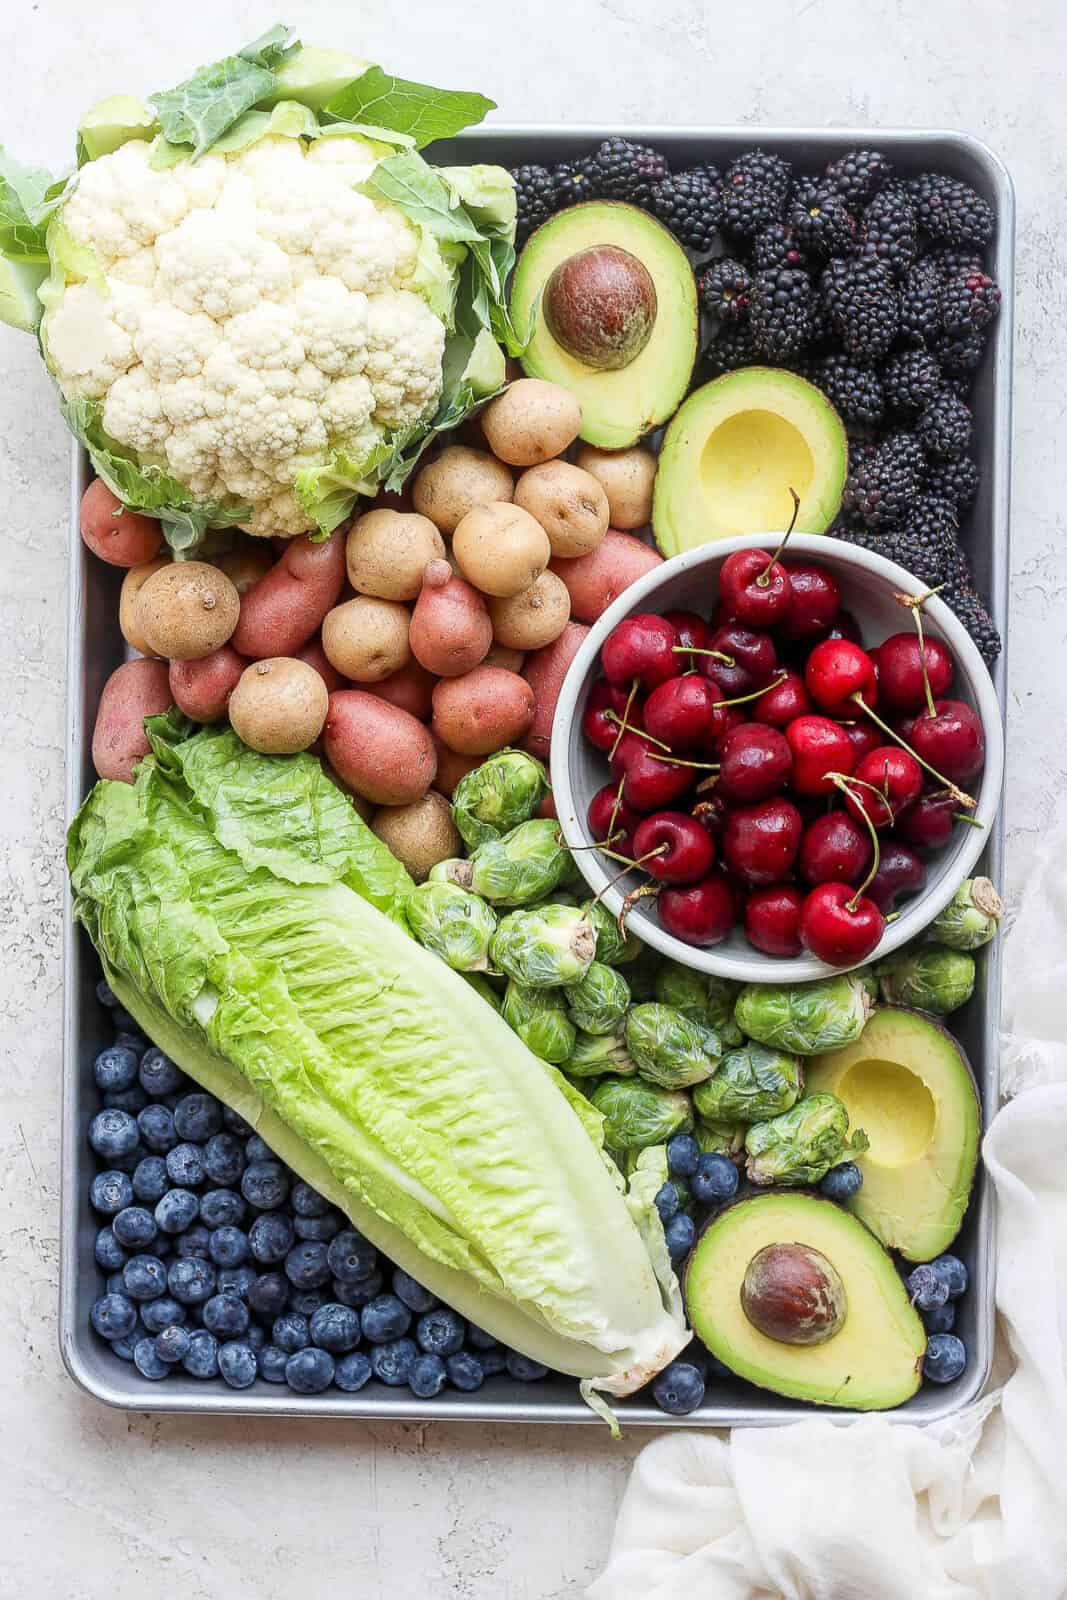 A baking sheet with cauliflower, blackberries, potatoes, avocado, cherries, brussel sprouts, romaine lettuce, and blueberries.